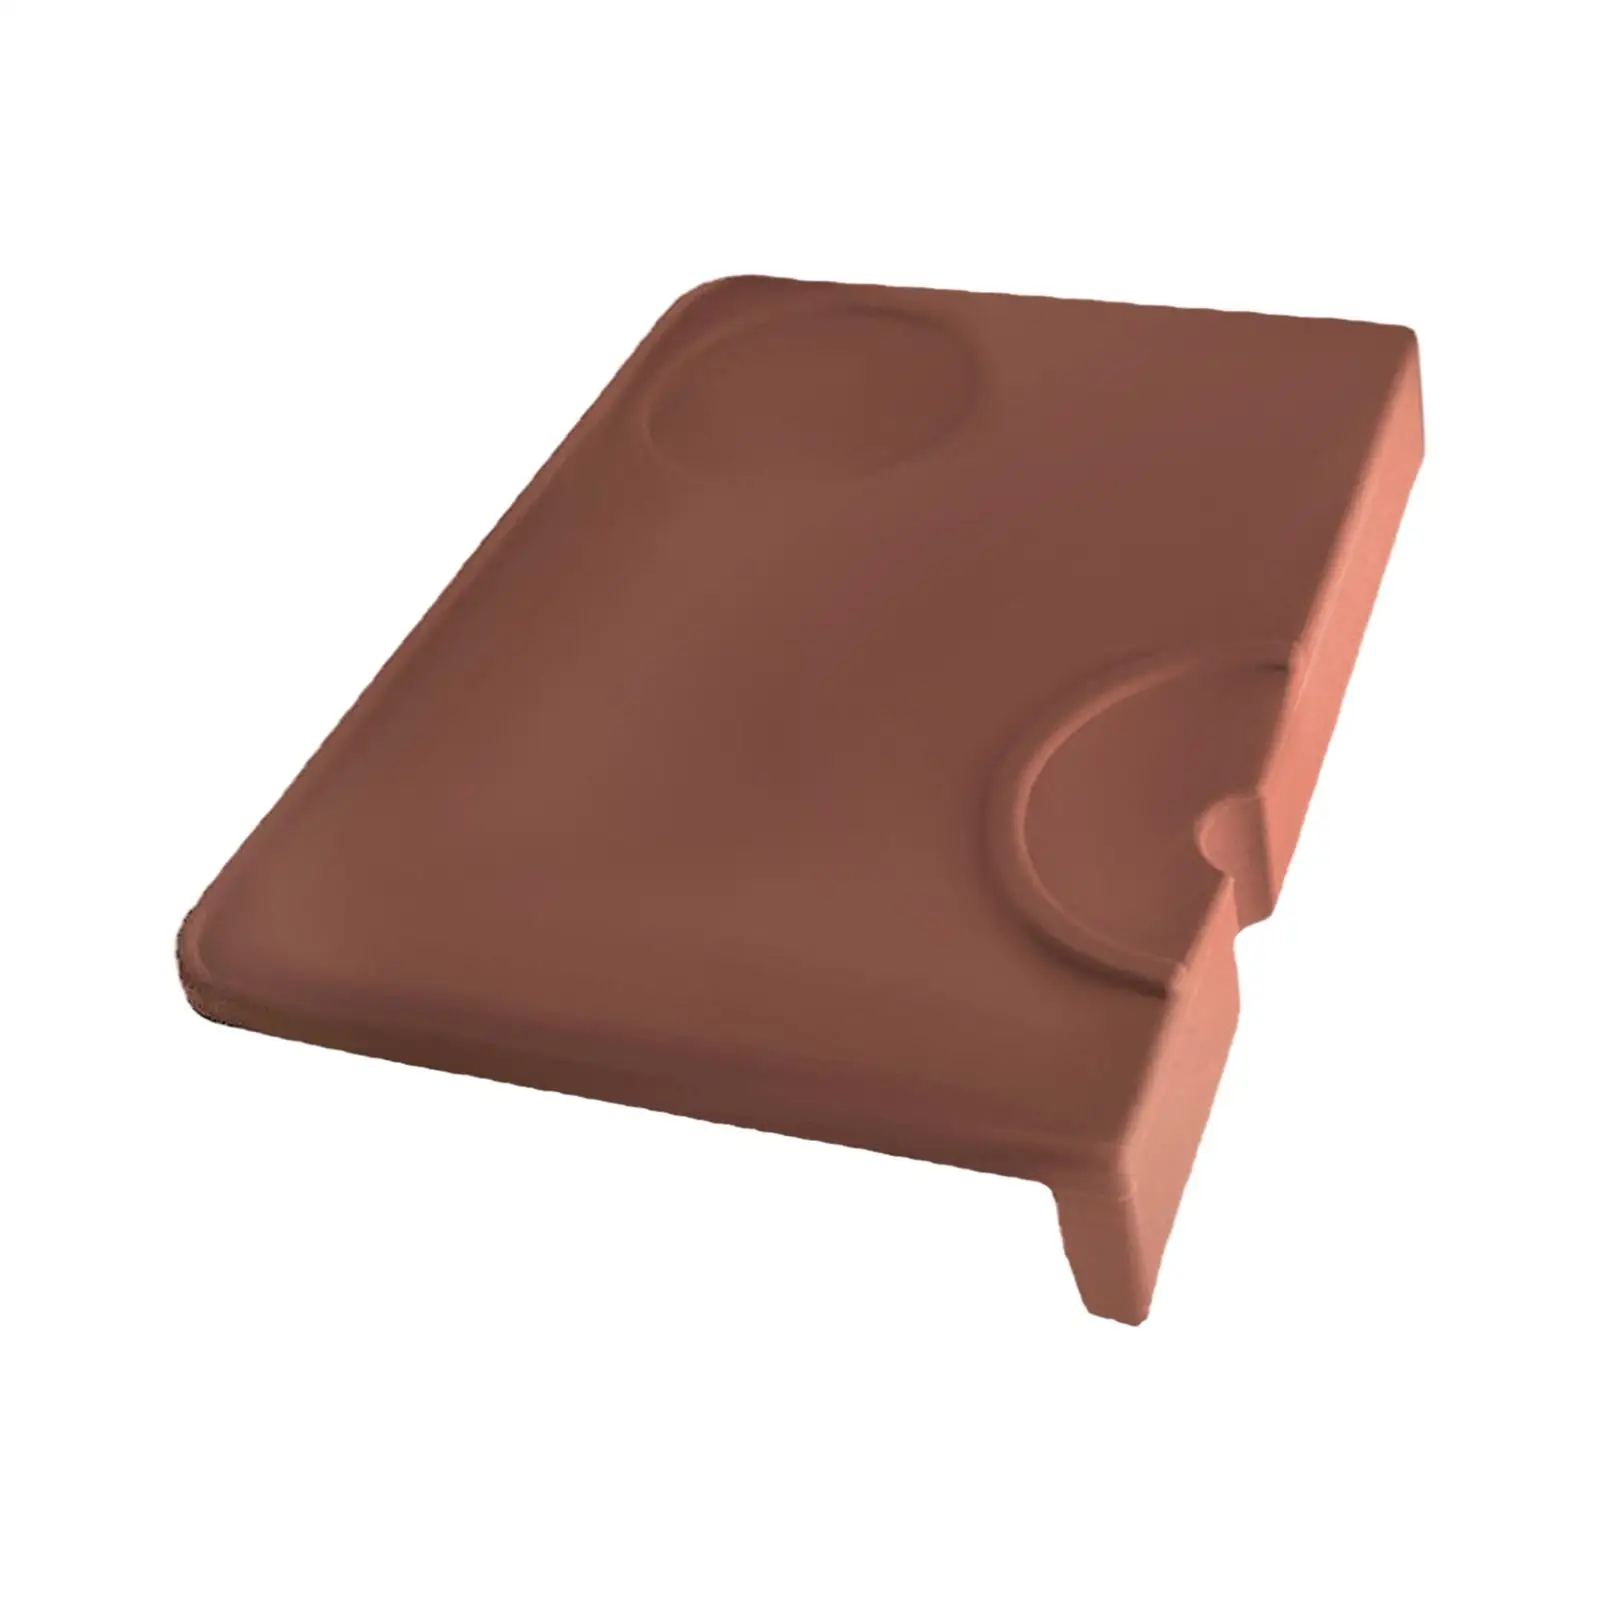 Non Slip Silicone Coffee Pad Espresso accessory Tools Wear Resistance Flat Coffee Tamper Mat for Families Leisure Bars